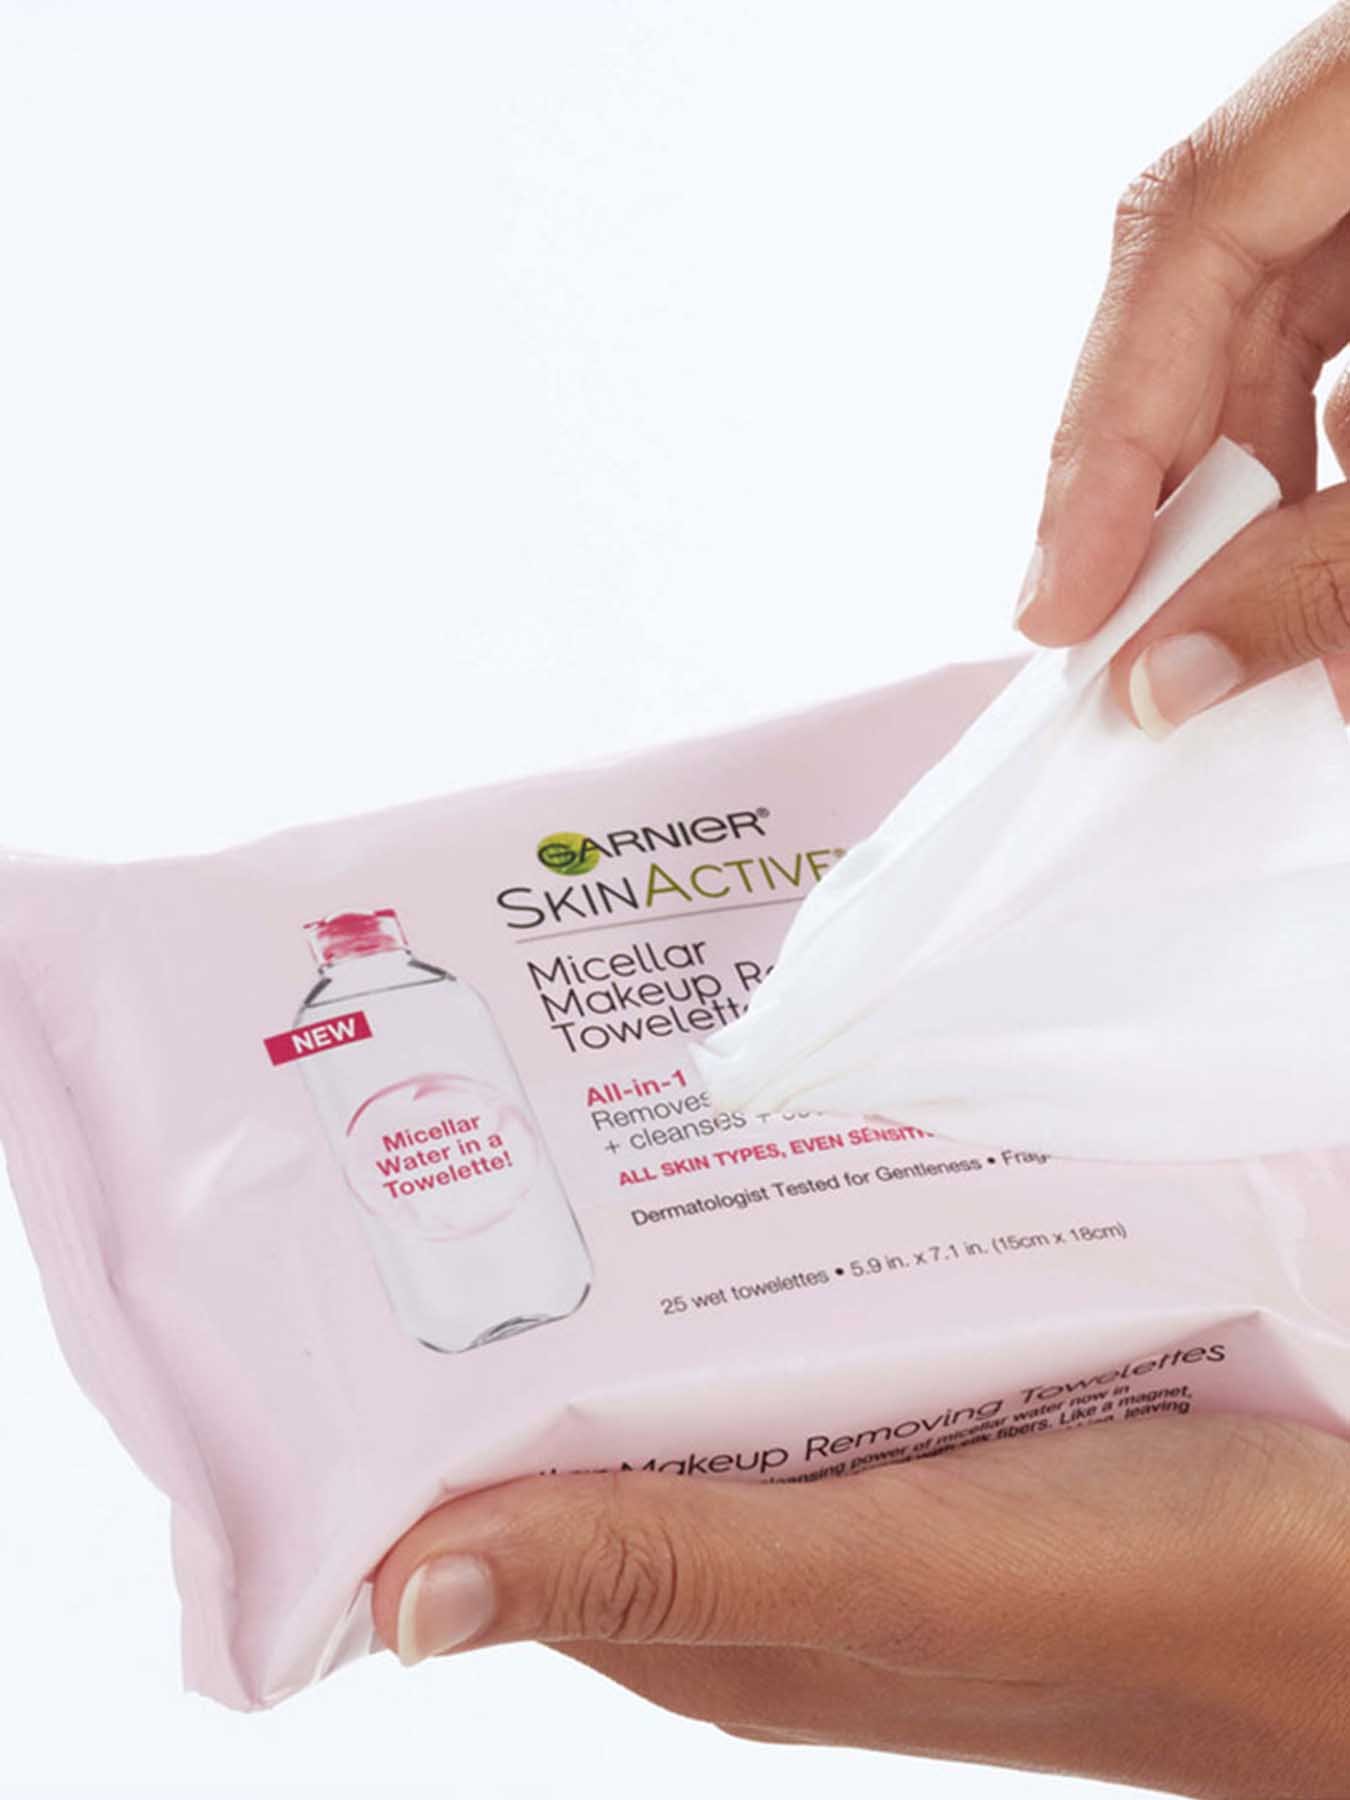 In Use view of Micellar Makeup Removing Towelettes All-in-1, All Skin Types.